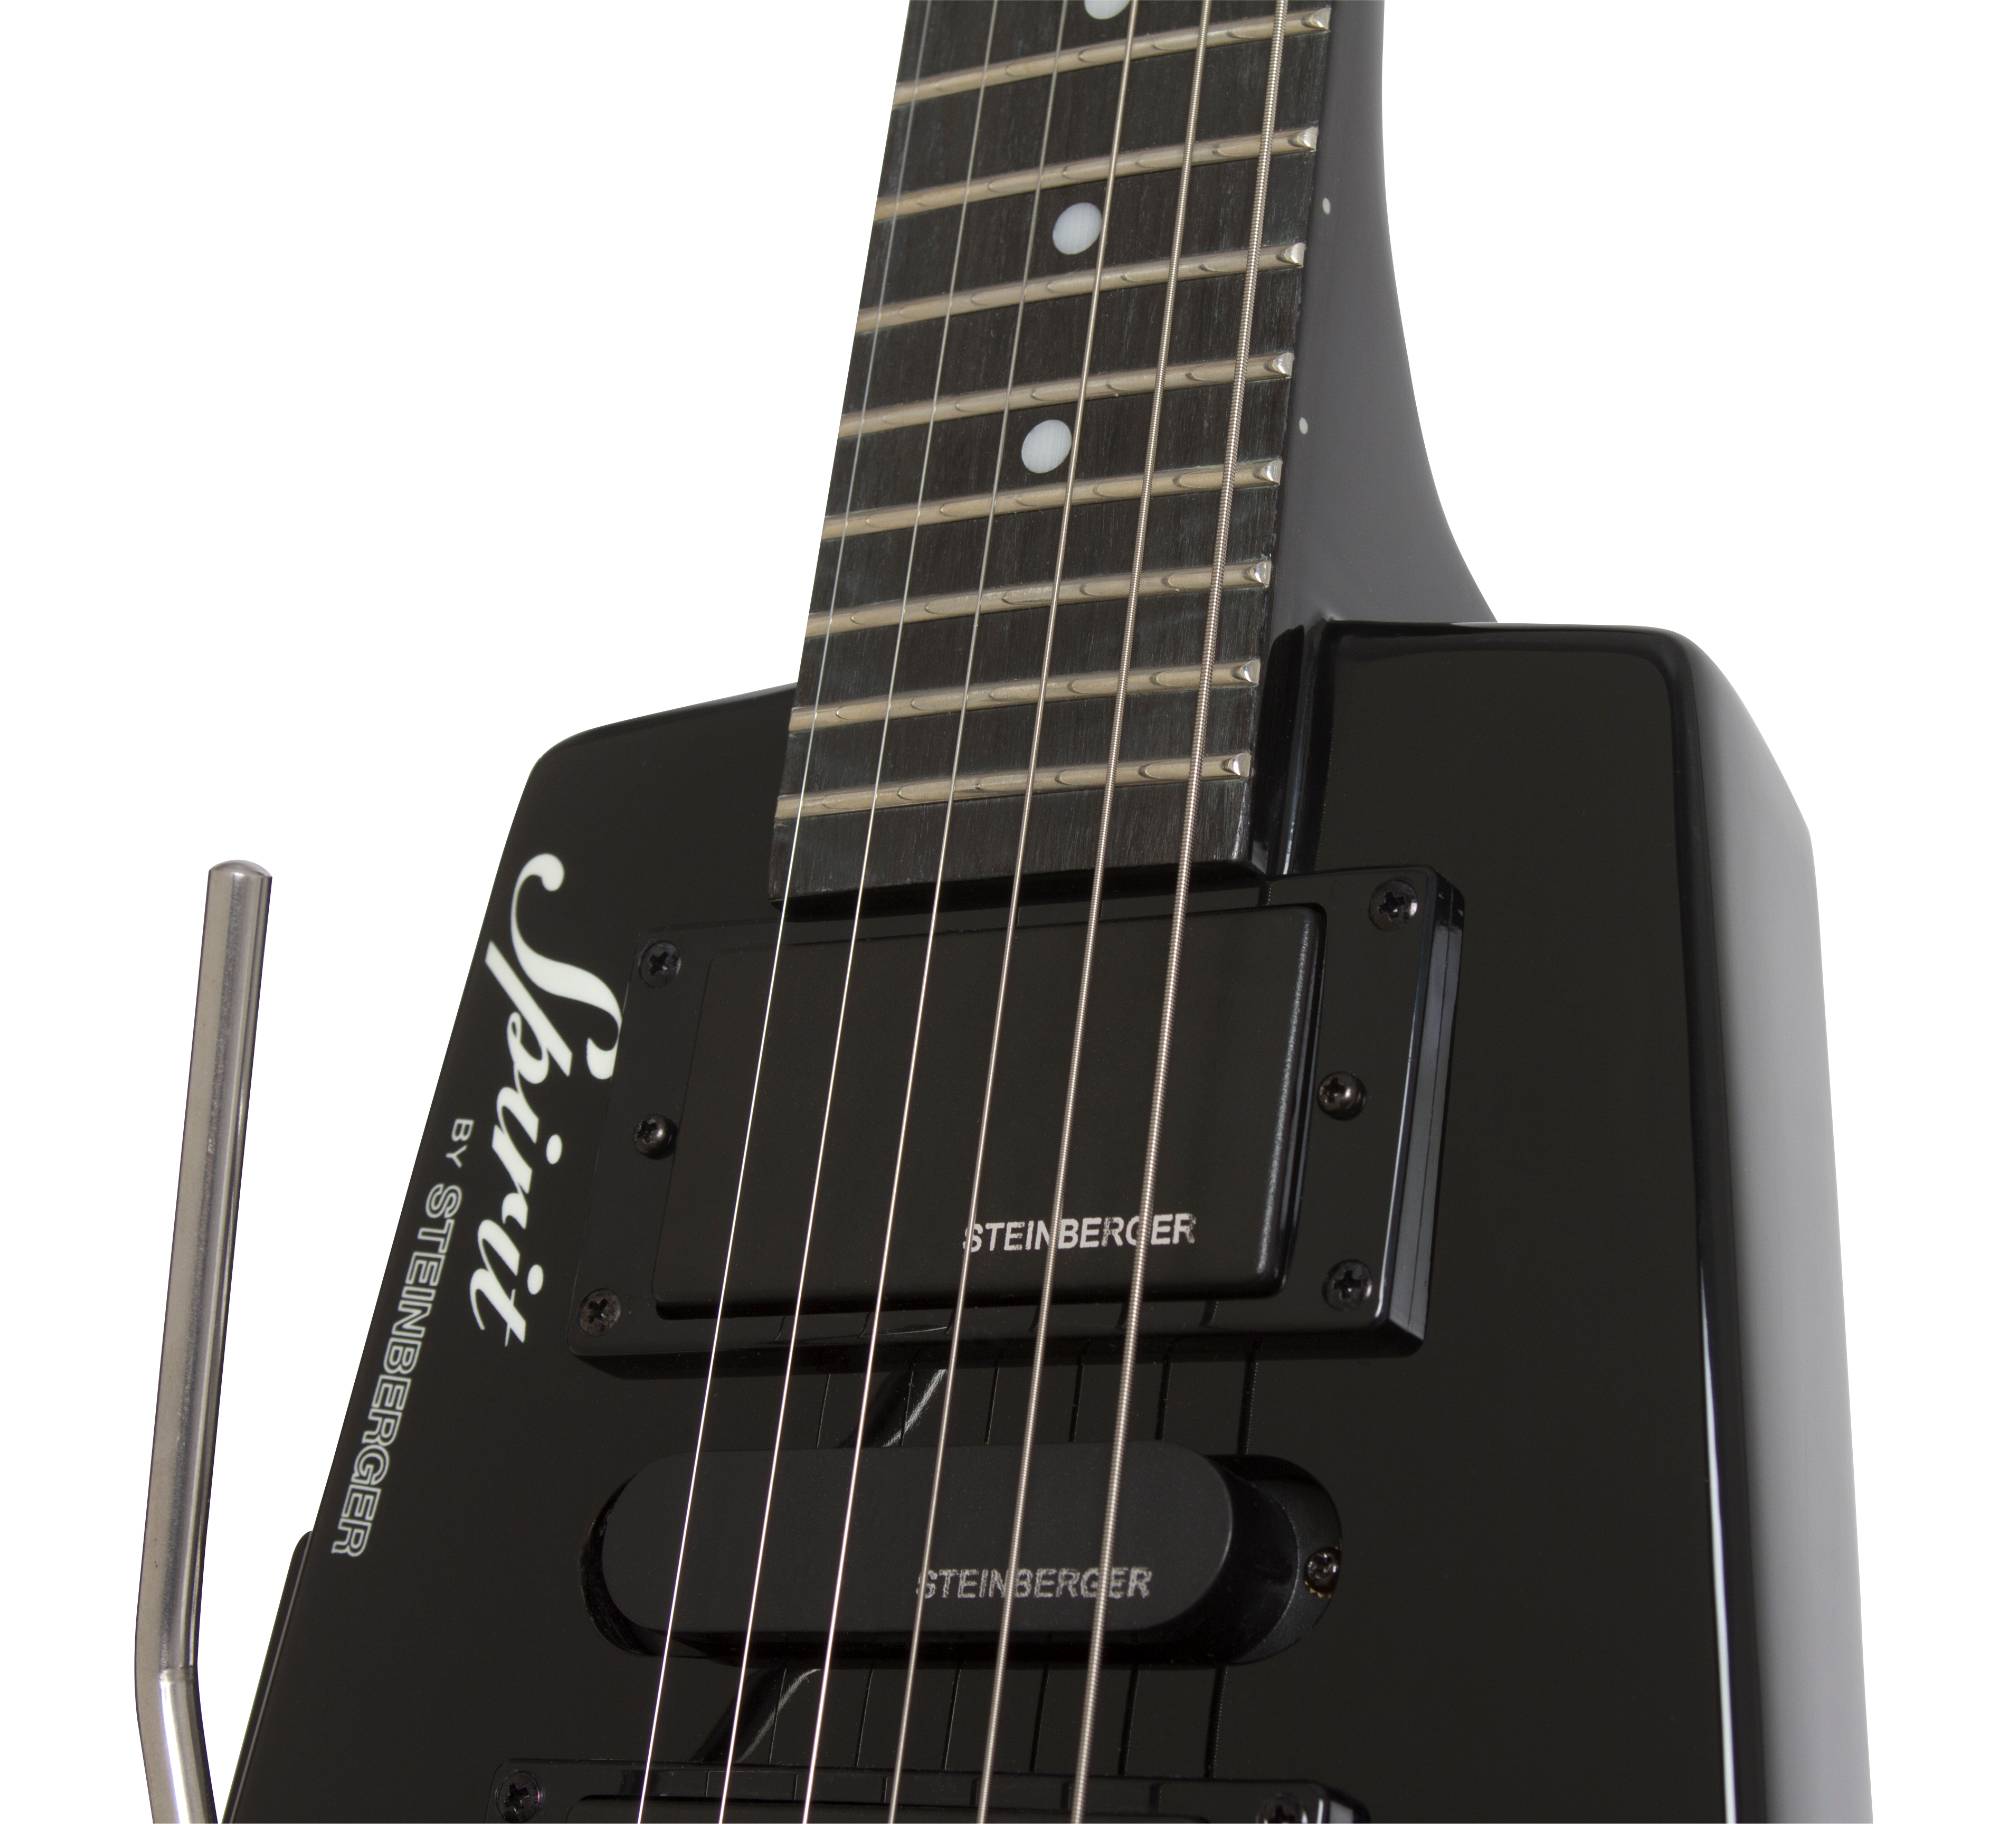 Steinberger Gt-pro Deluxe Outfit Lh Gaucher Hsh Trem Rw +housse - Black - Left-handed electric guitar - Variation 4